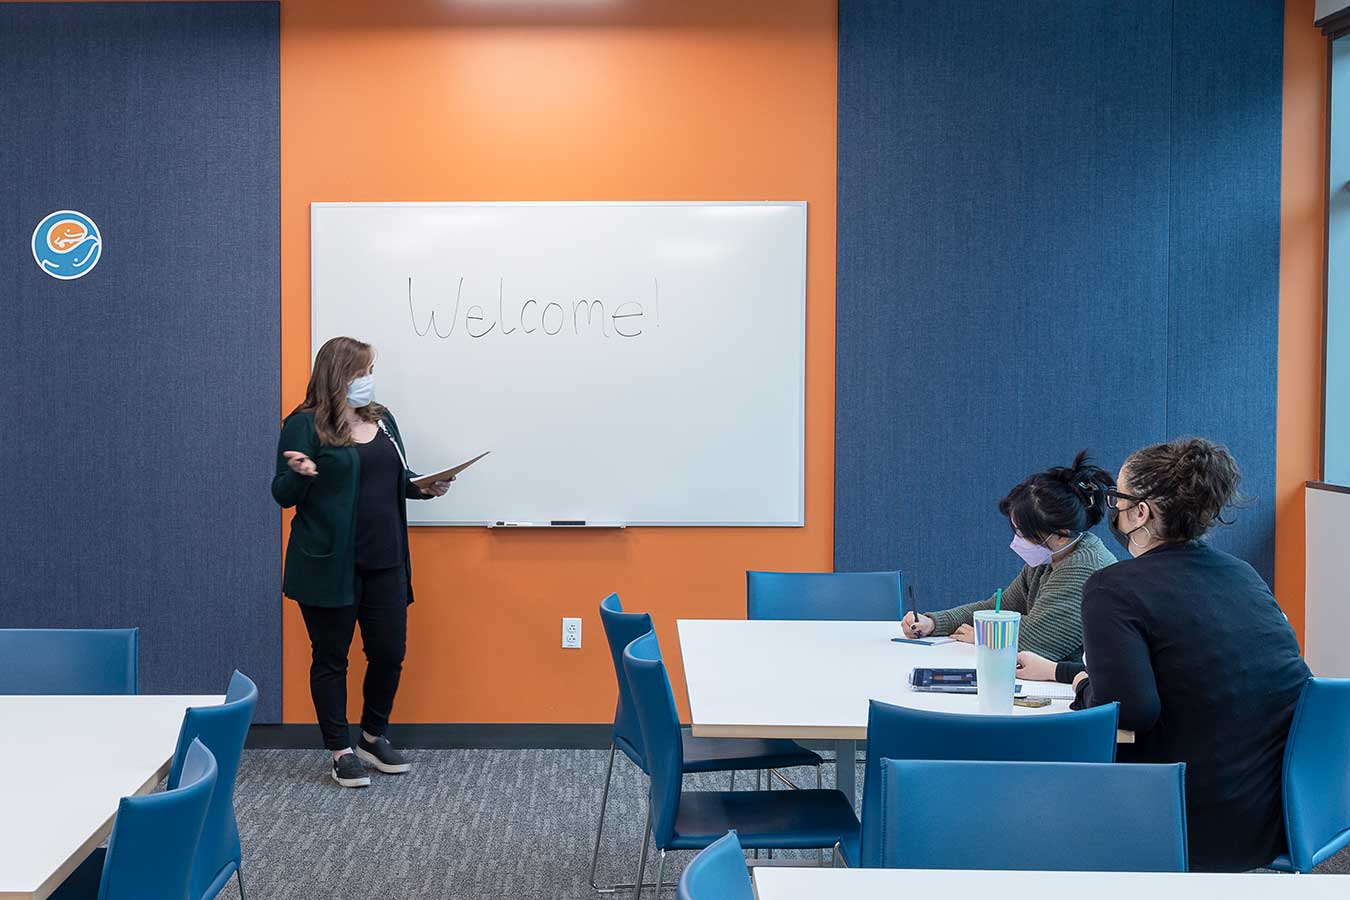 An insttructor stands in front of a whiteboard with the word "welcome" written on it.